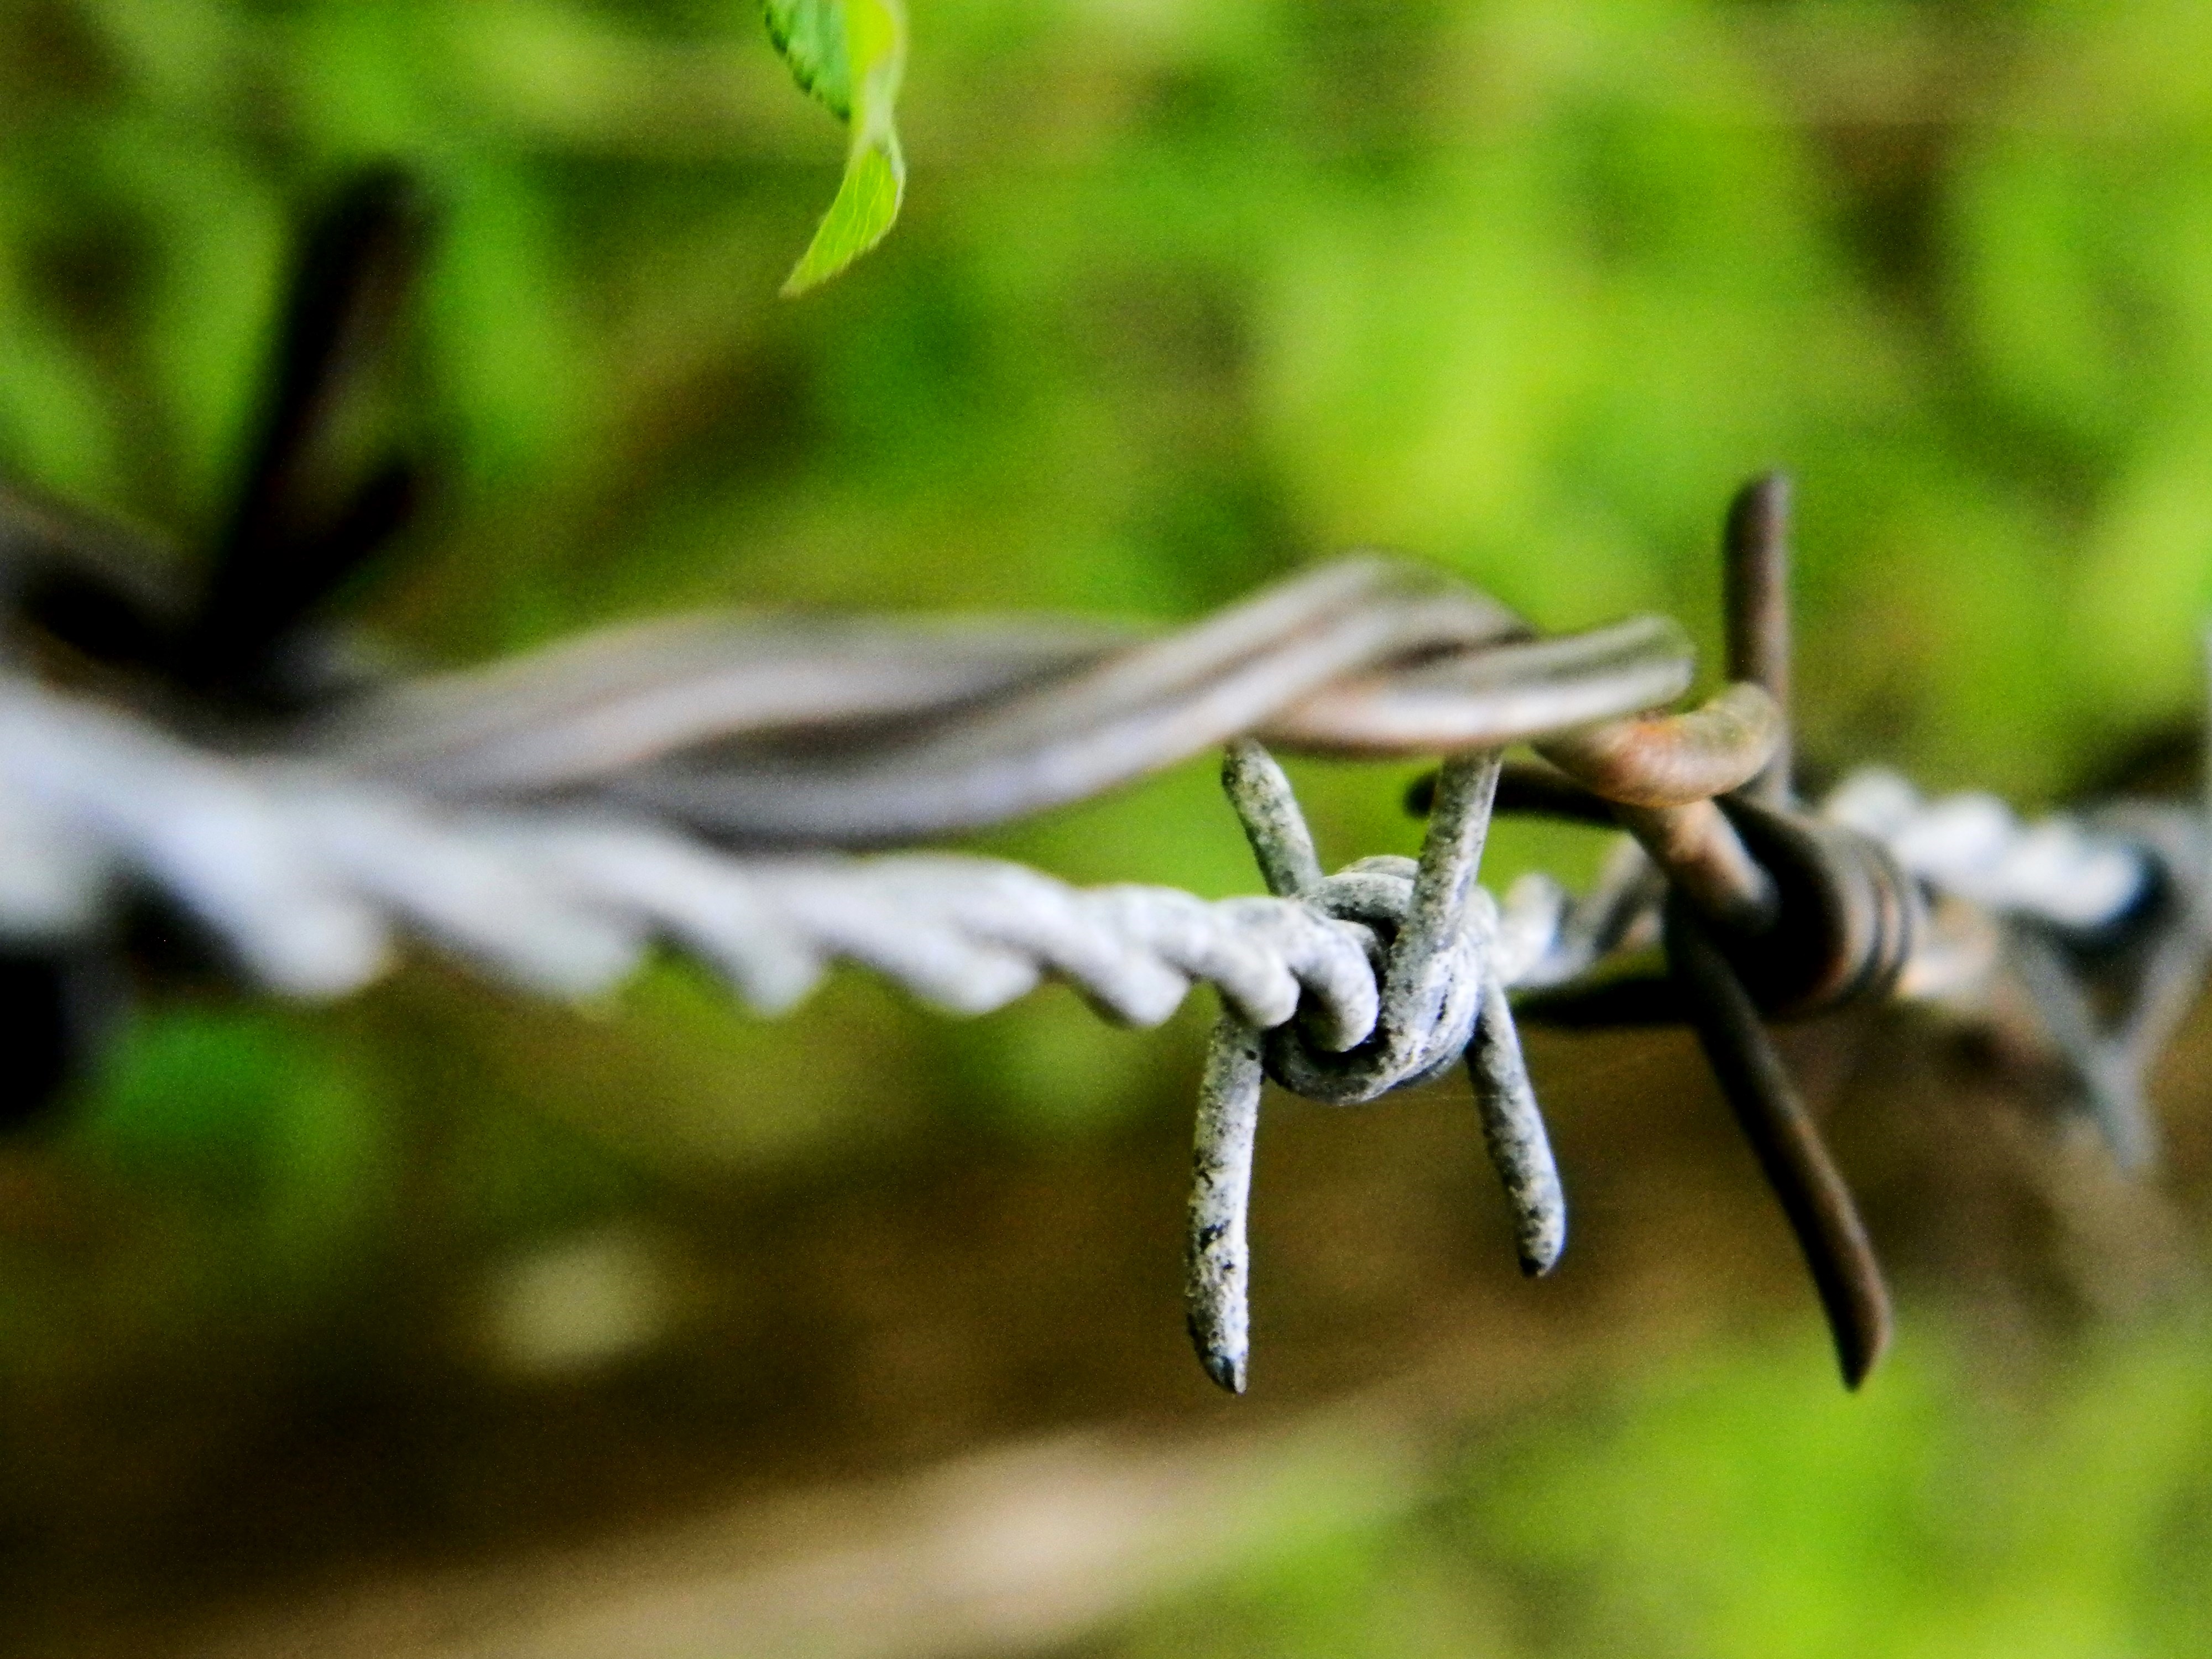 man made, barb wire, barbed wire, nature